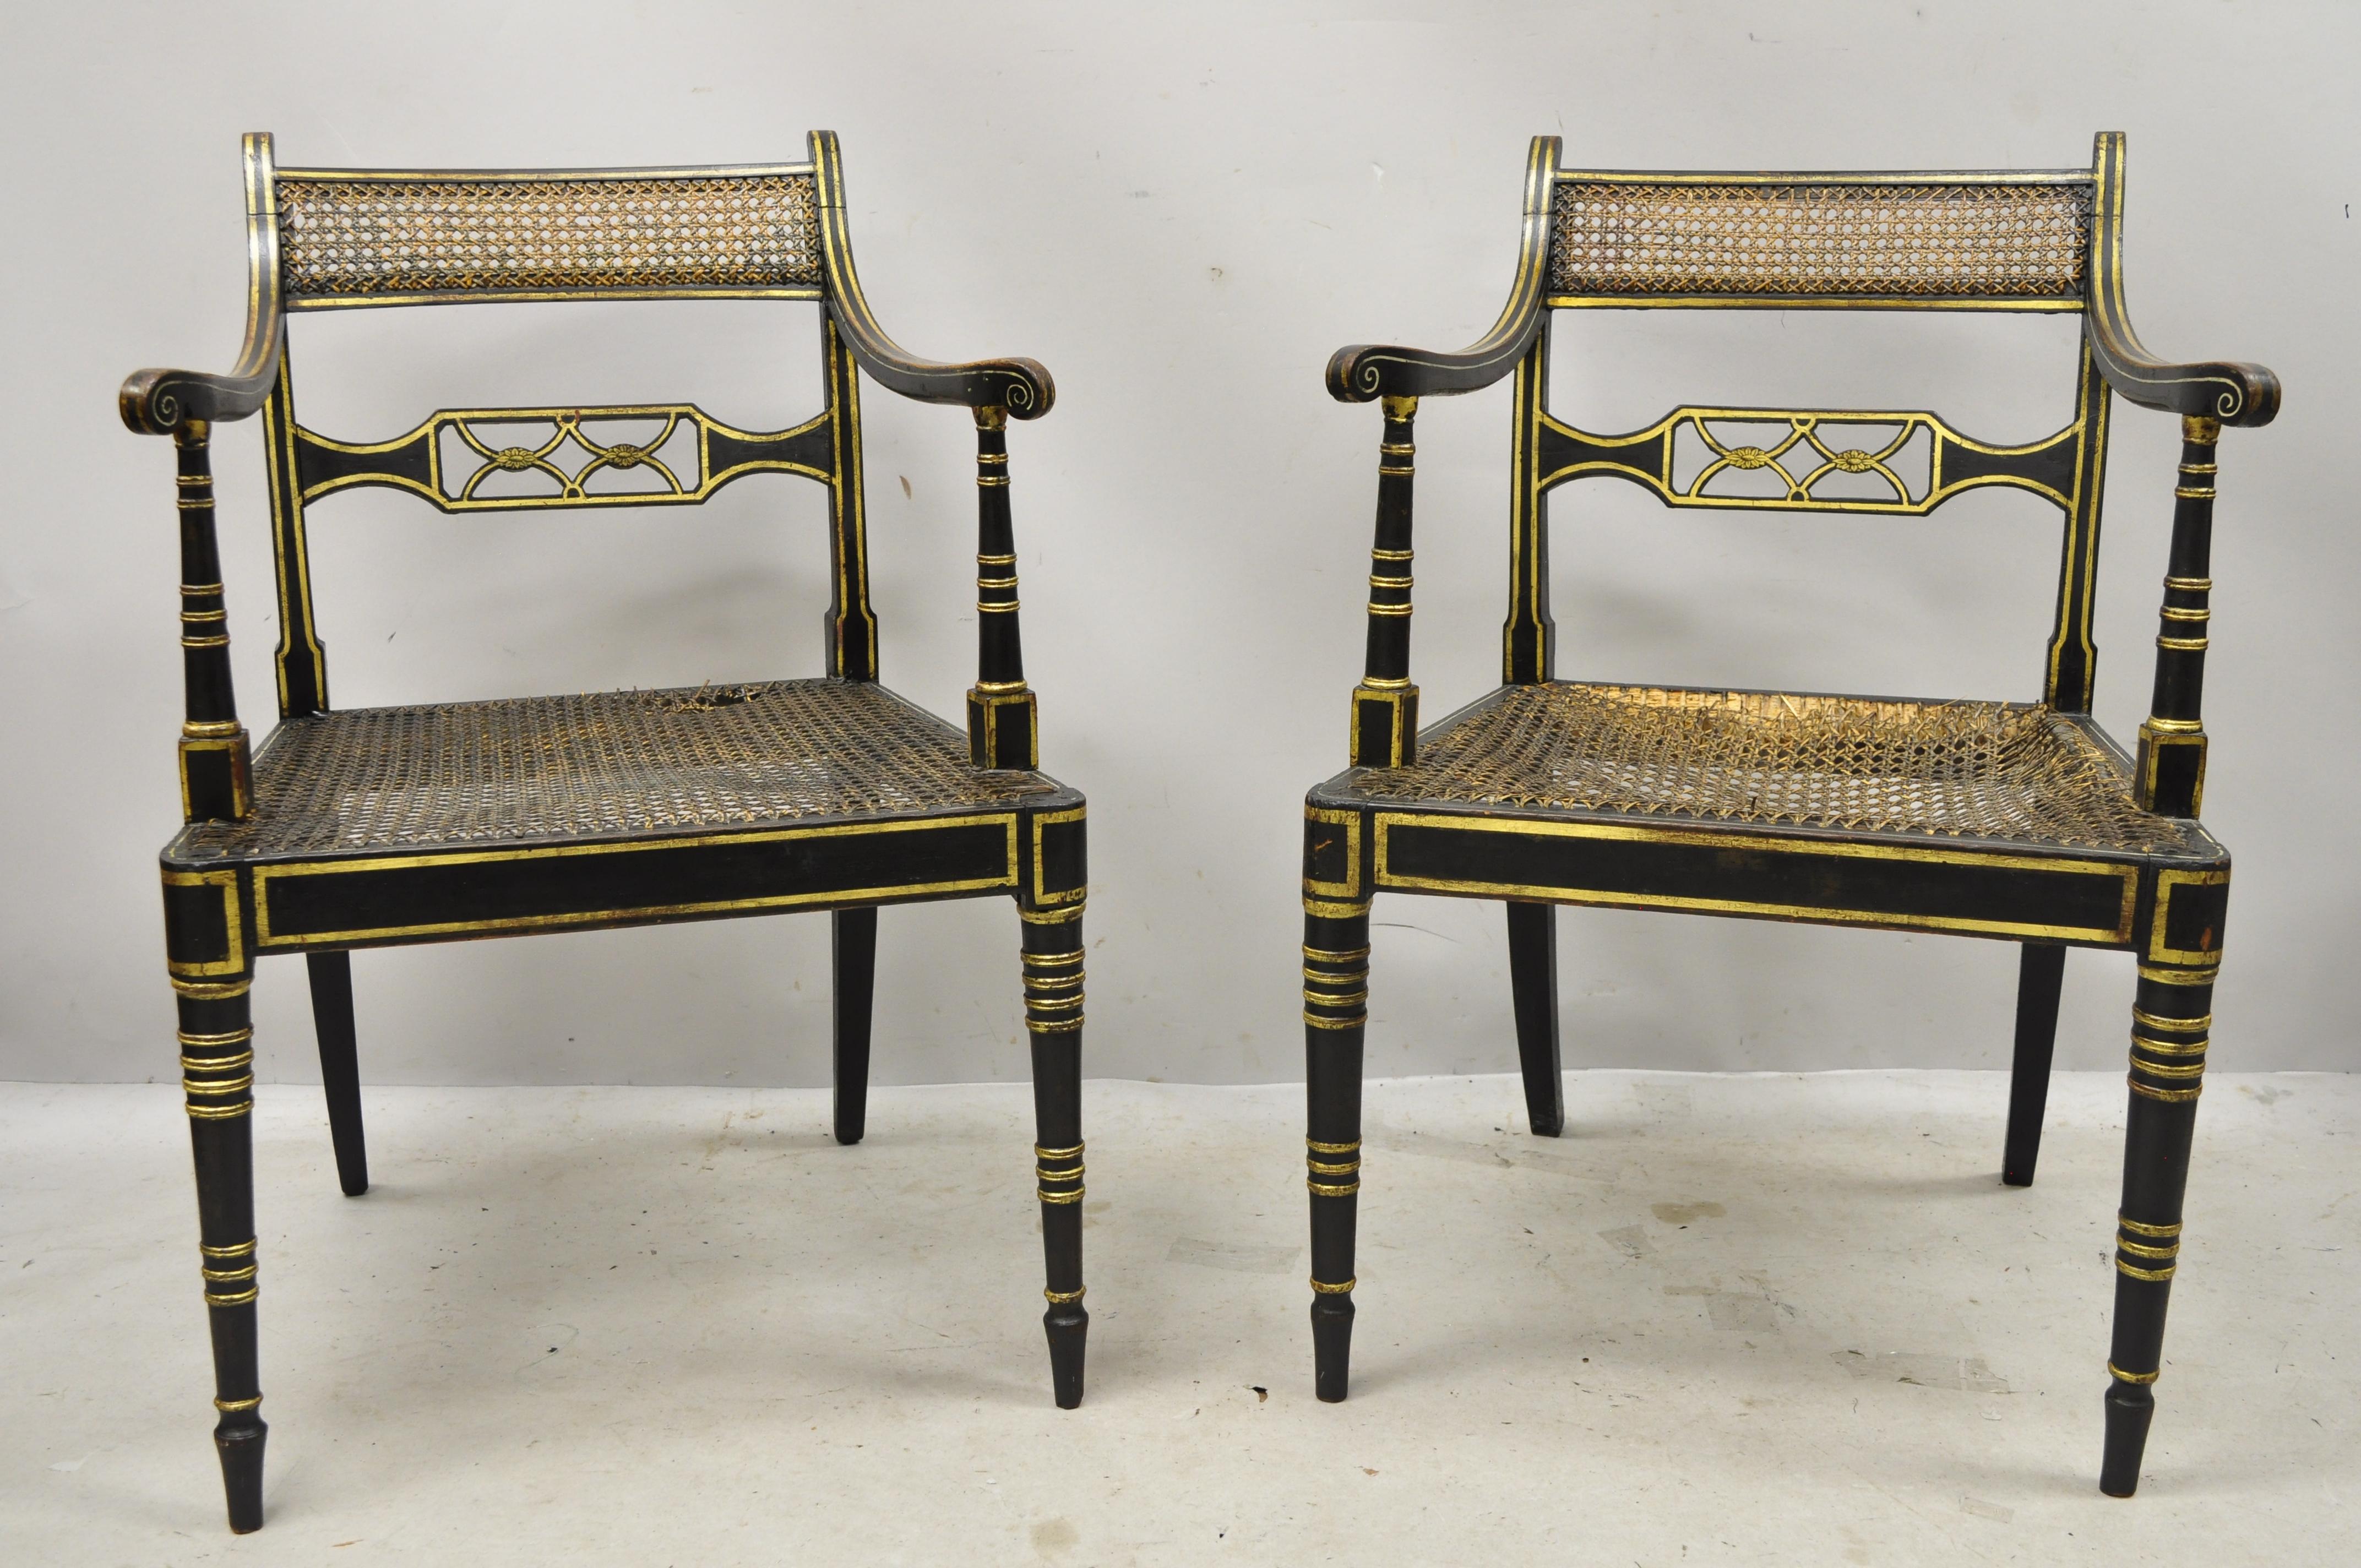 Antique English Regency black ebonized cane armchairs - a pair. Item features solid wood frame, black distressed finish, cane back and seat, very nice antique item, quality English craftsmanship, circa late 19th-early 20th century. Measurements: